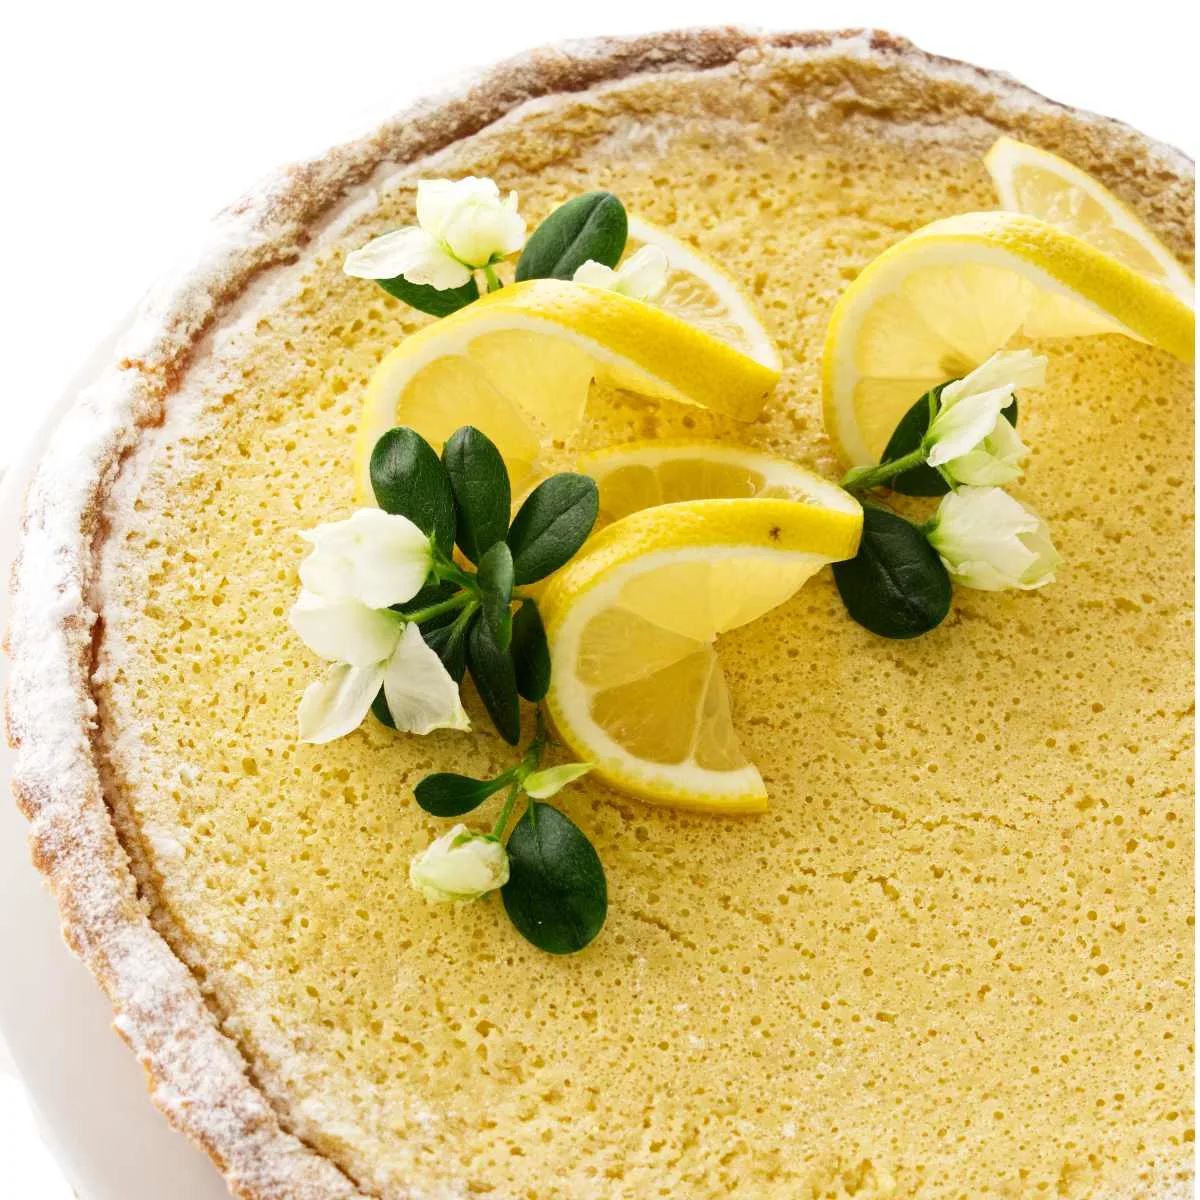 Close up overhead view of creamy whole lemon tart garnished with lemon slices and white blossoms